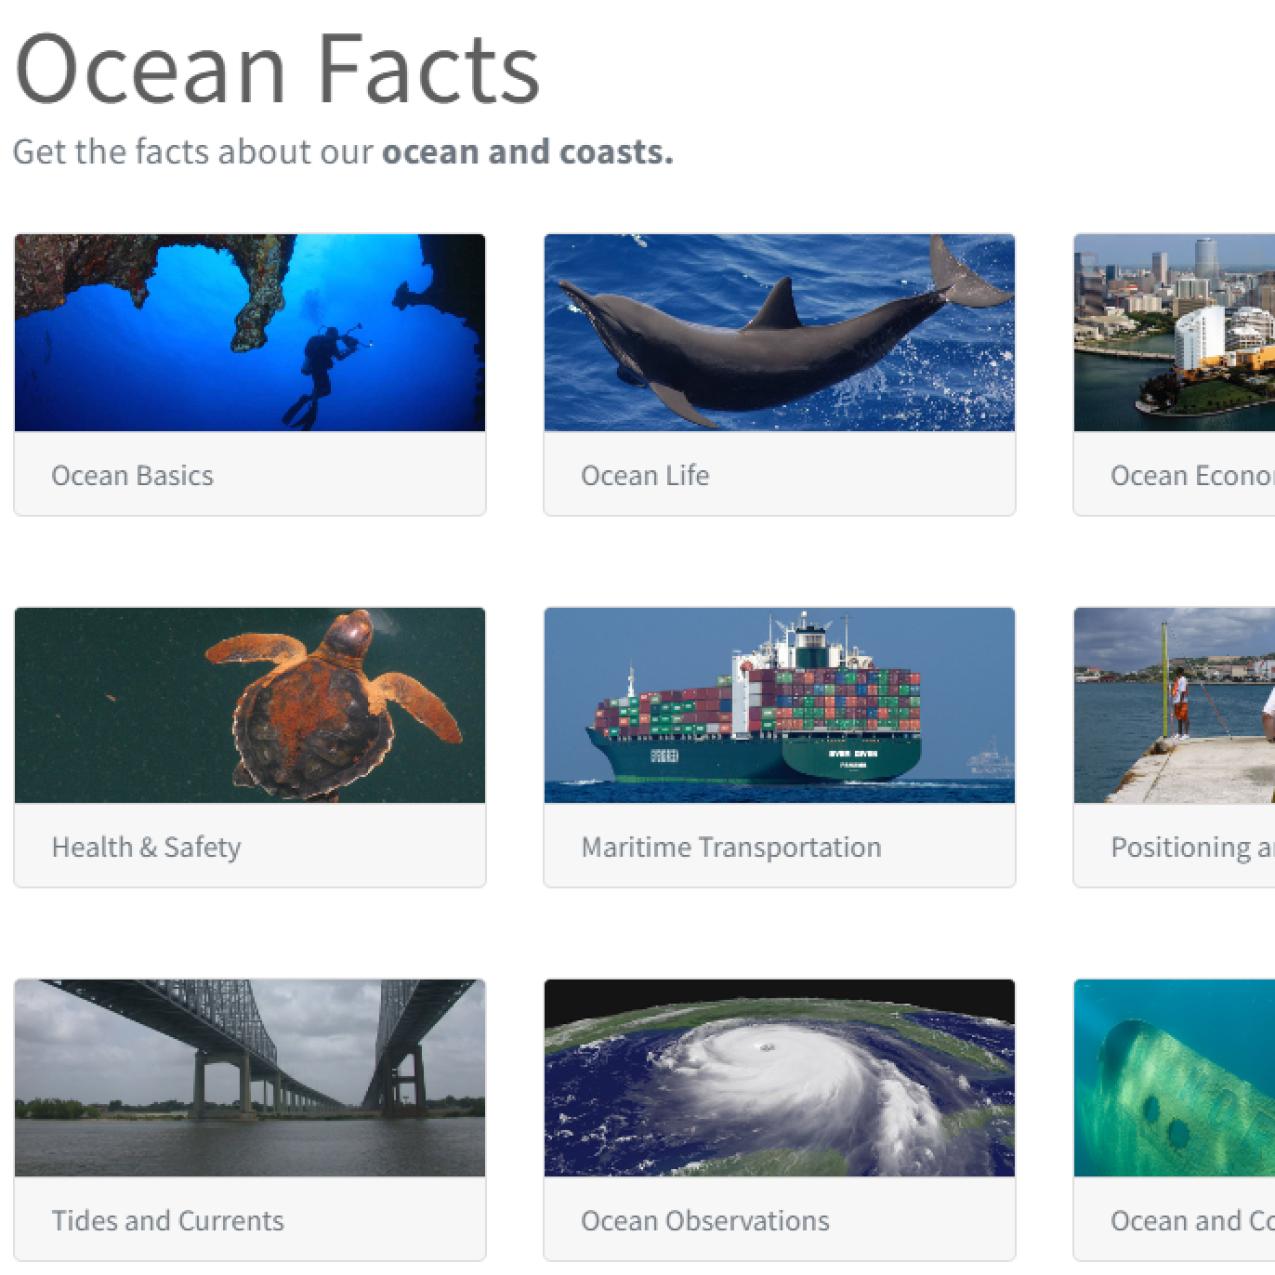 A grid of photos related to the ocean and coasts. Text: Ocean Facts: Get the facts about our ocean and coasts.